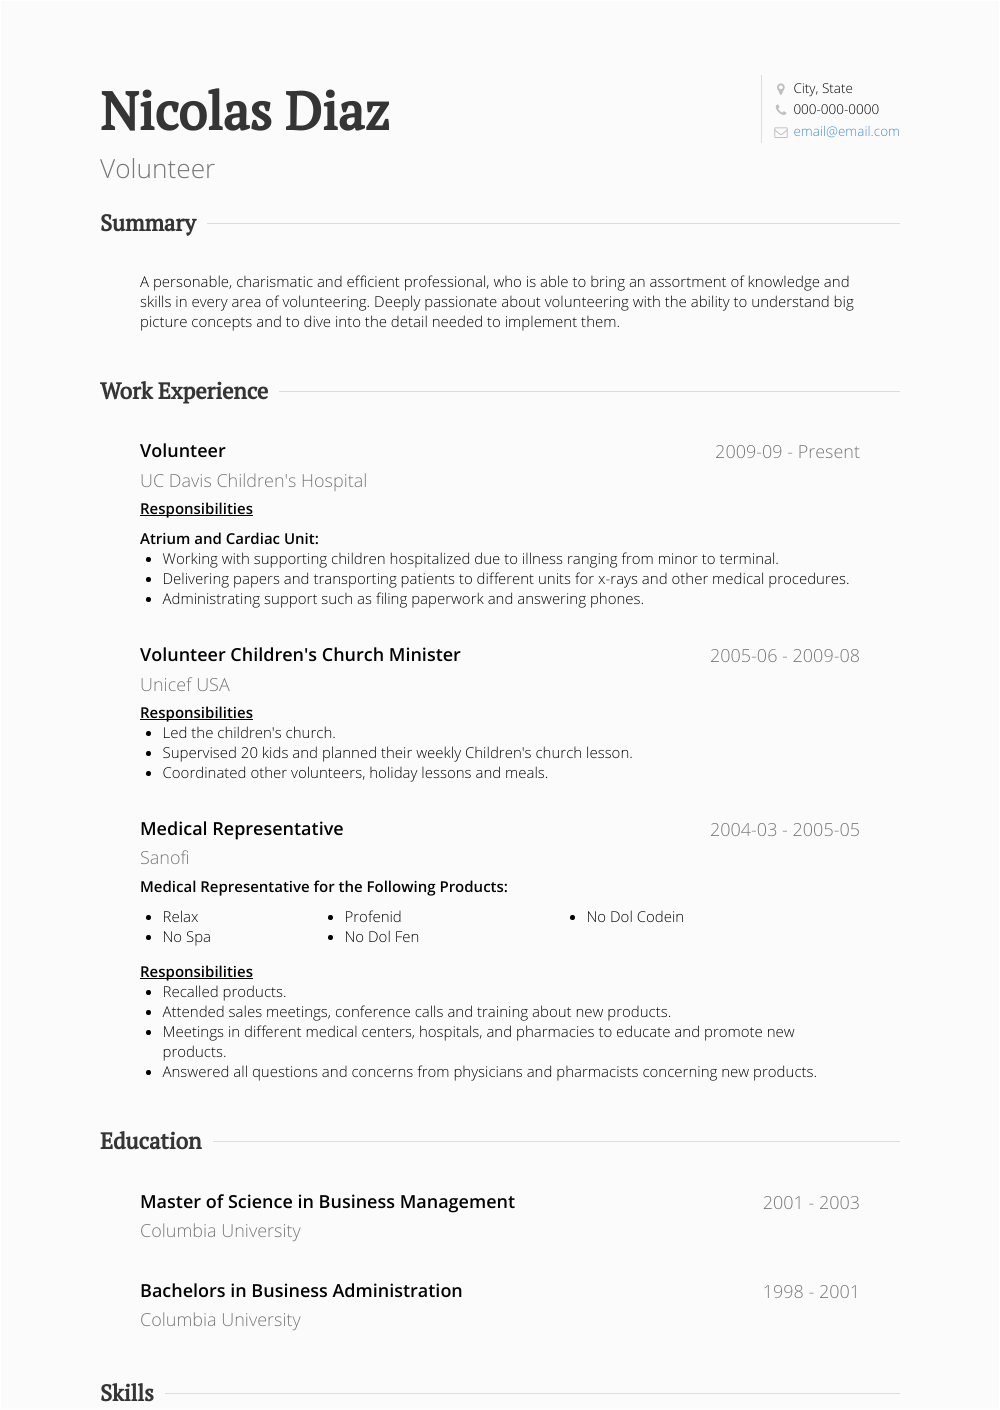 Free Resume Templates with Volunteer Experience Volunteer Work Resume Samples and Templates